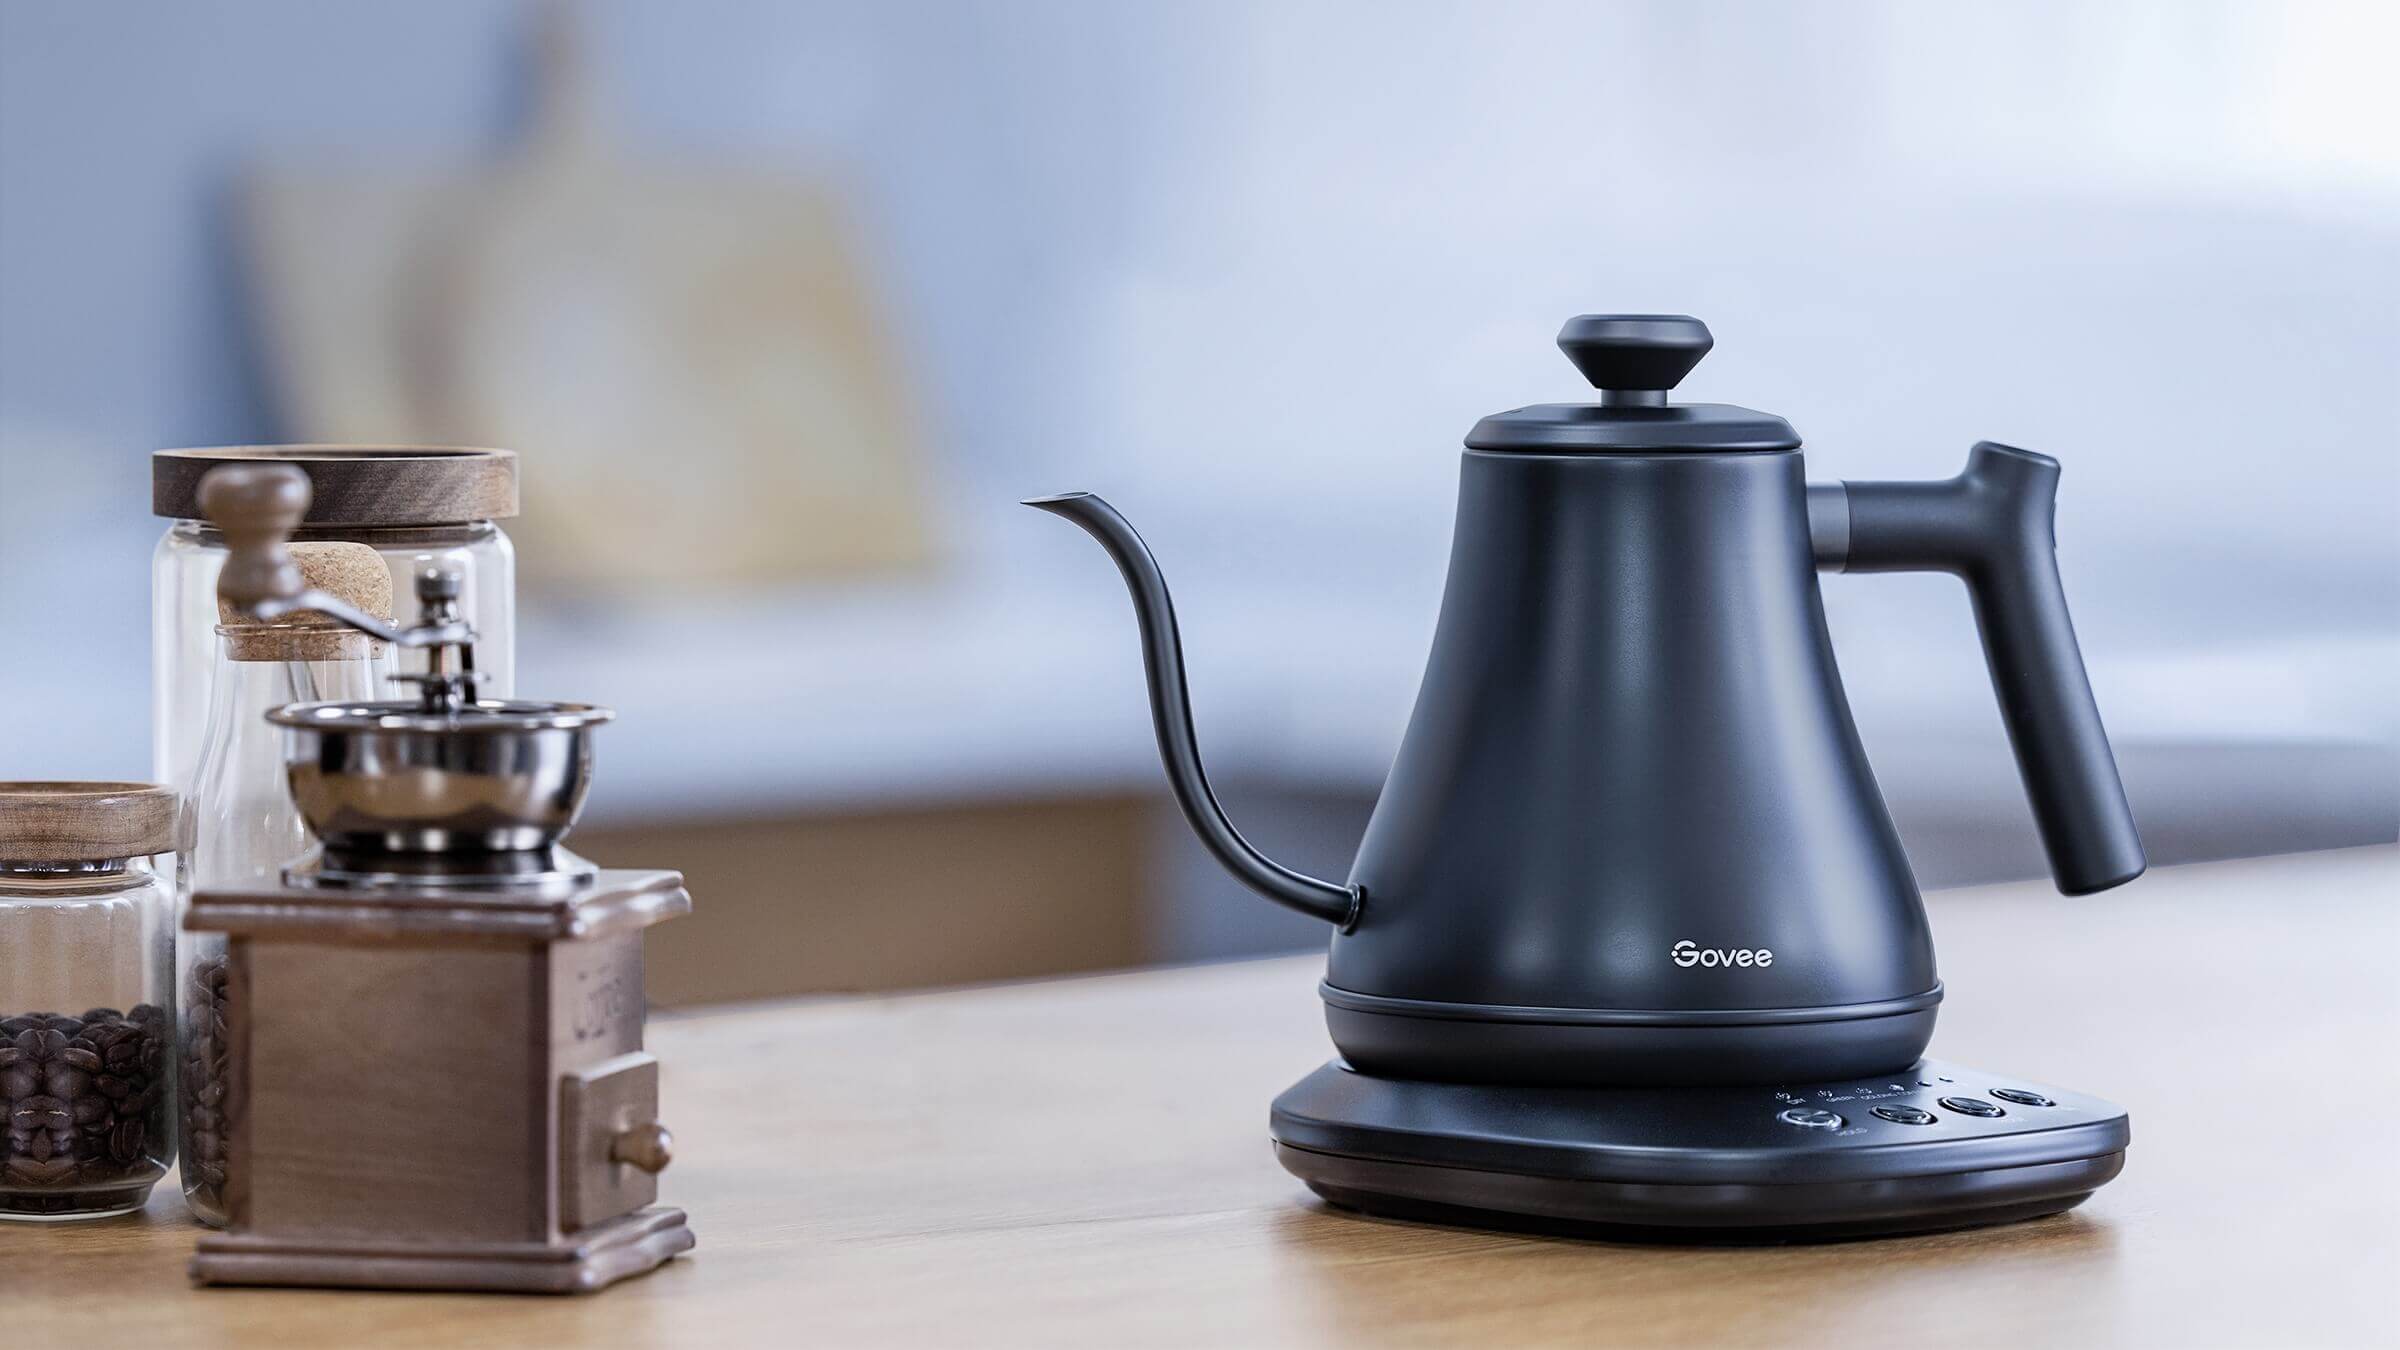 Govee smart kettle. One use and I'm never getting anything else